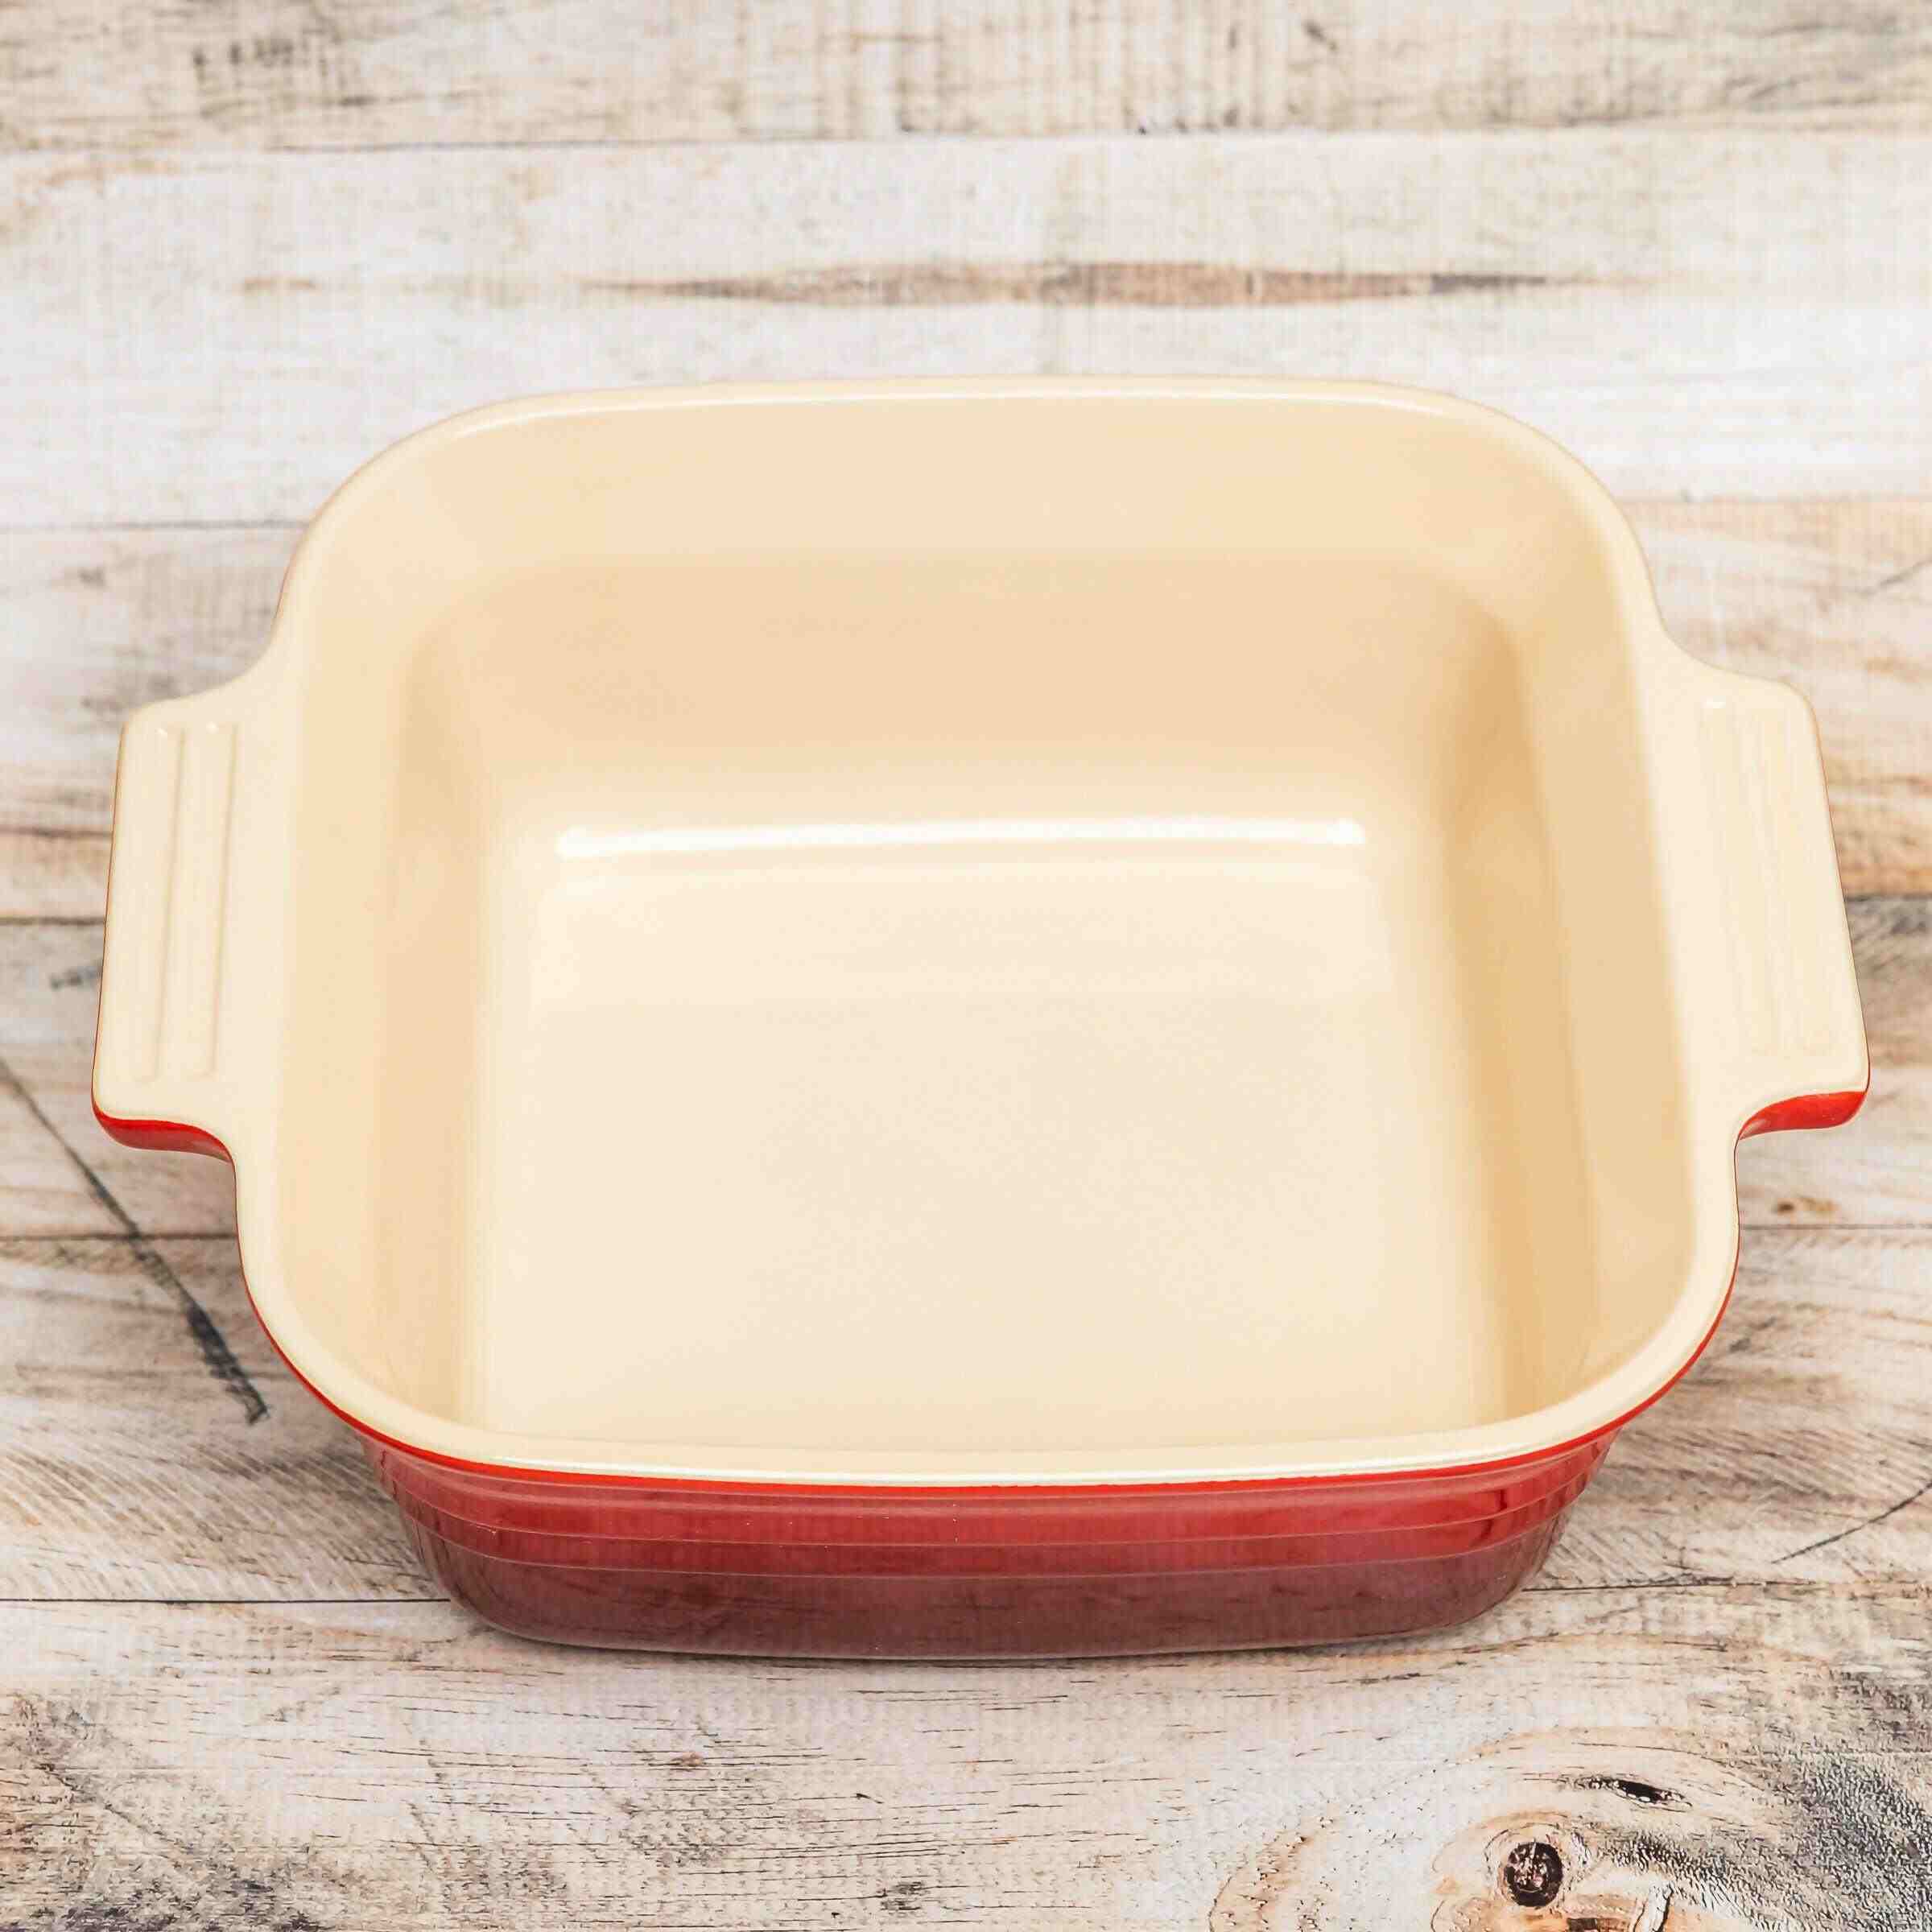 Pre-owned, gently used cerise Le Creuset Stoneware 3 Quart Square Casserole Dish With Lid, inside of dish